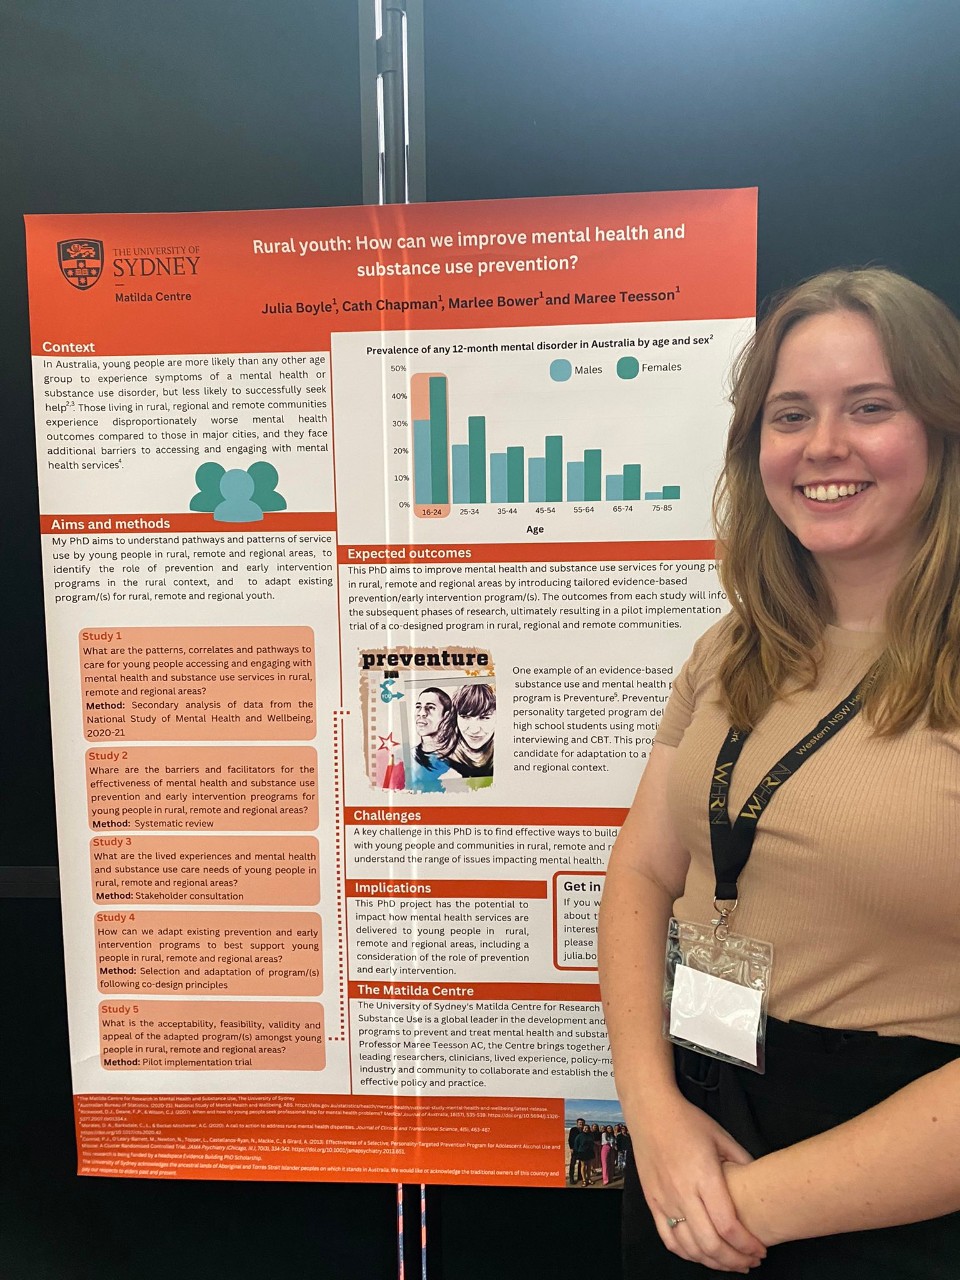 Julia is standing in front of a poster. She has long brown hair that she is wearing out and is wearing a white shirt. The poster behind her discusses her research into regional communities. 